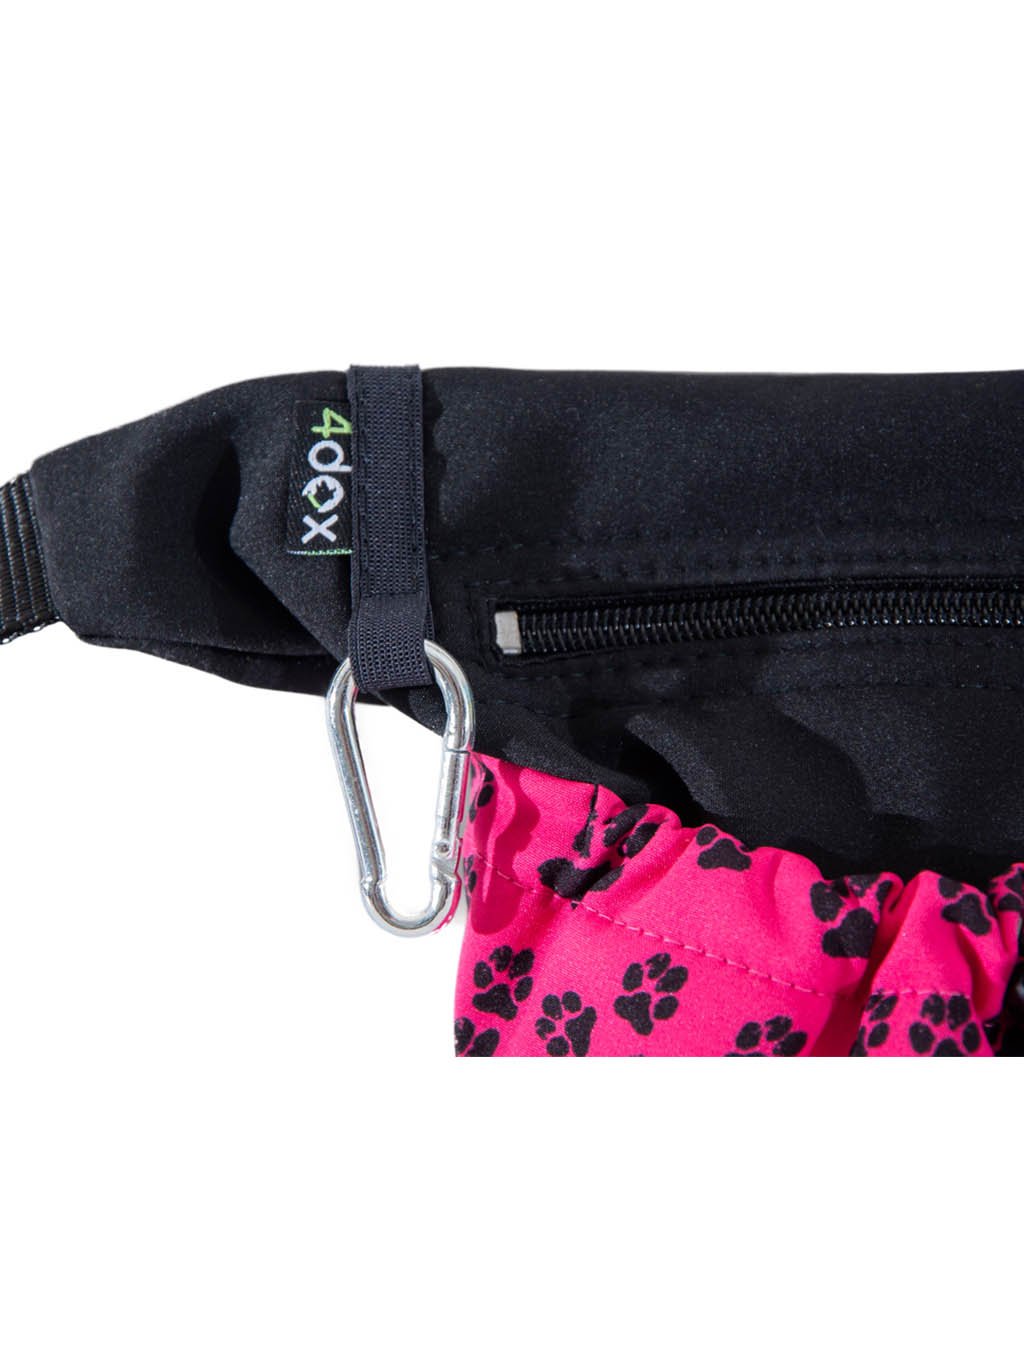 Treat bag 2in1 pink with paws 4dox